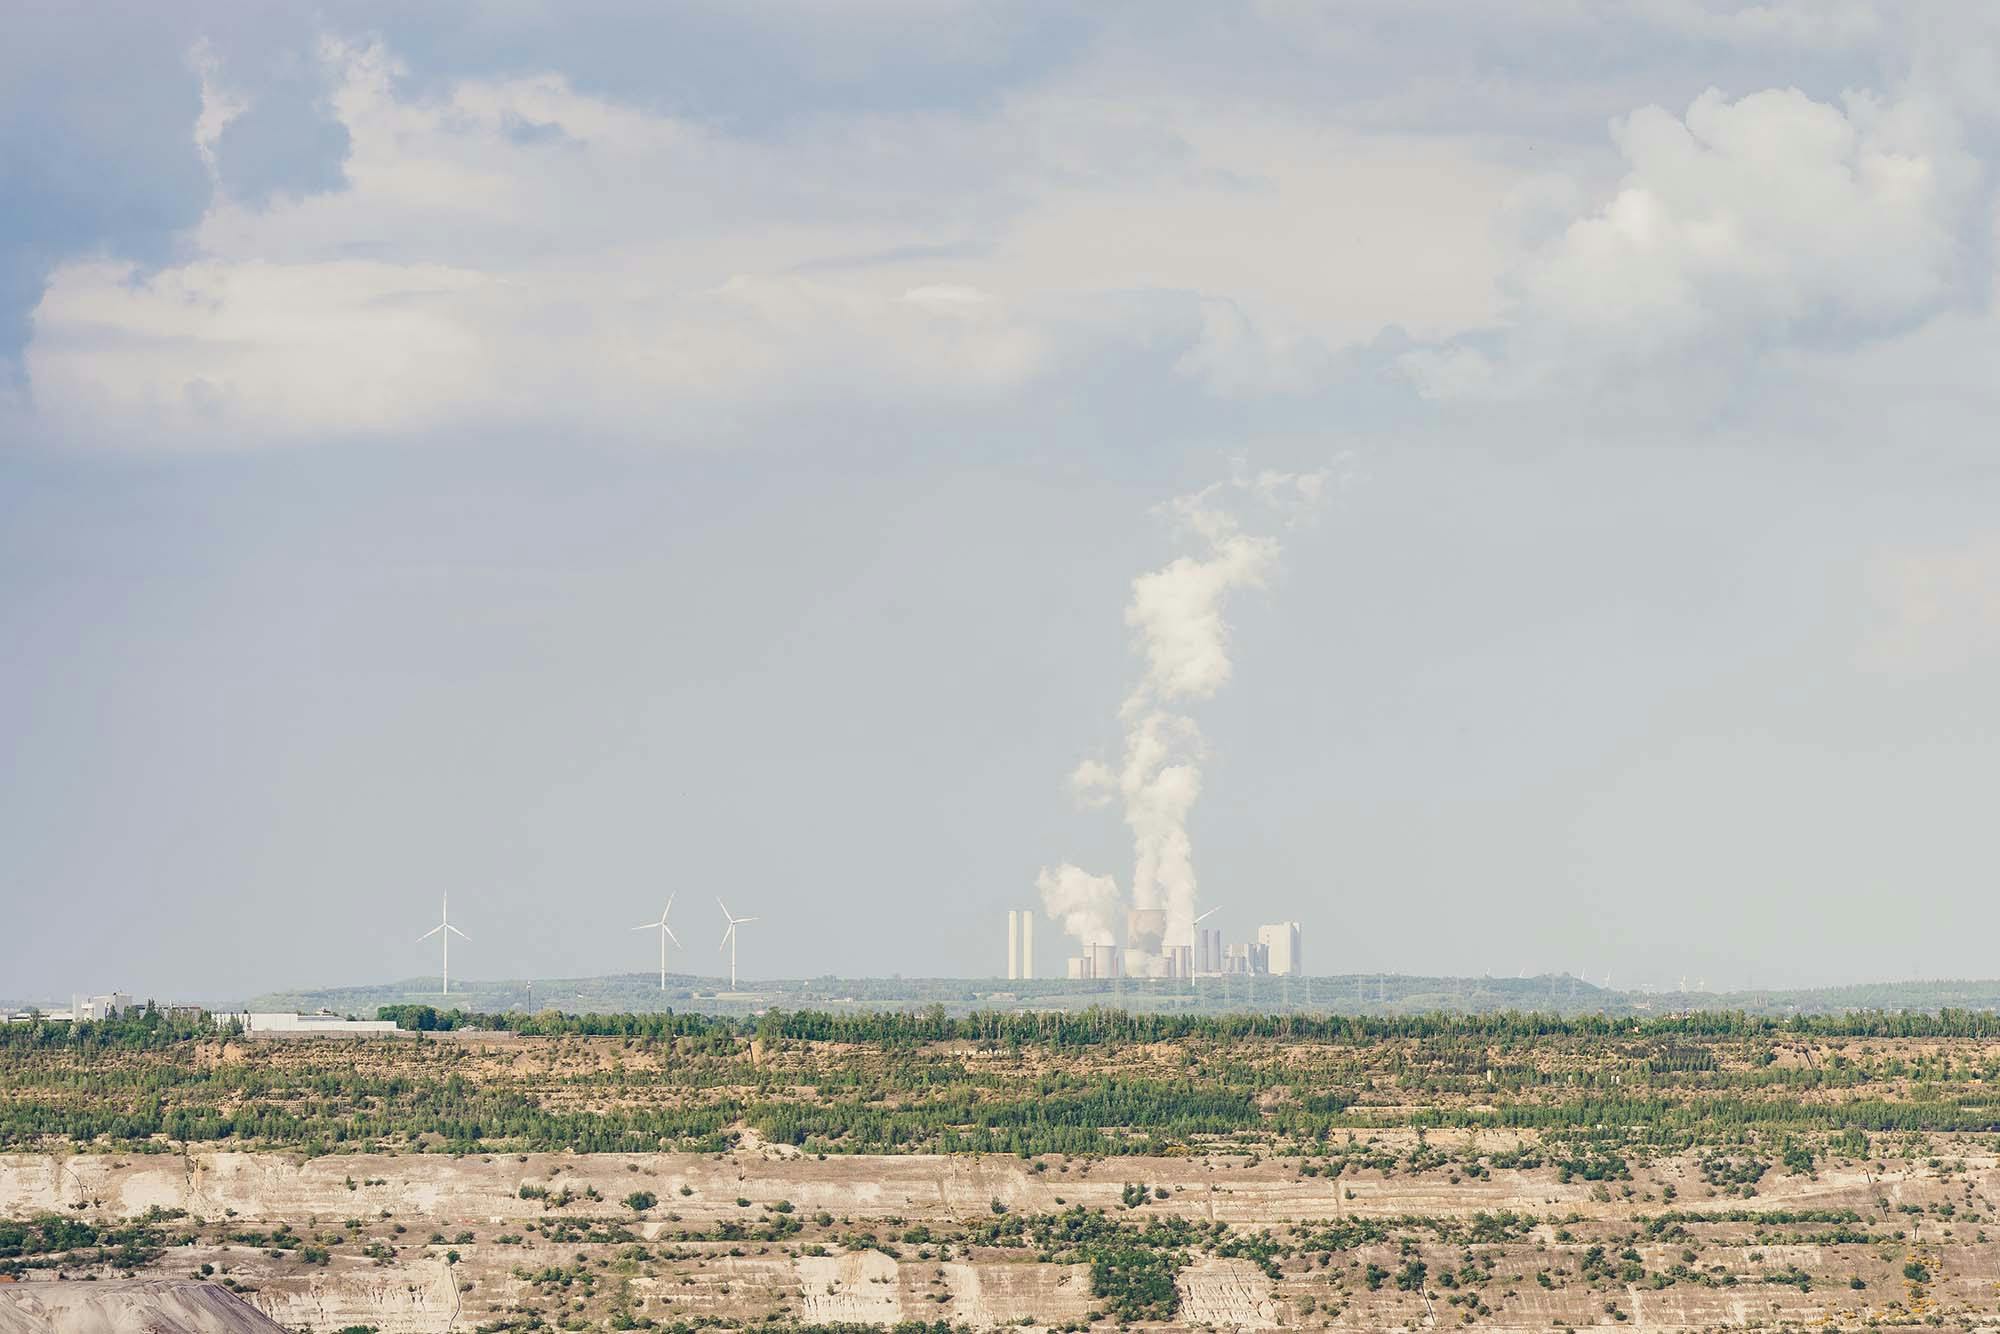 Smoke rises from factory chimneys (@barnimages). In front there are some wind mills and degraded land. 